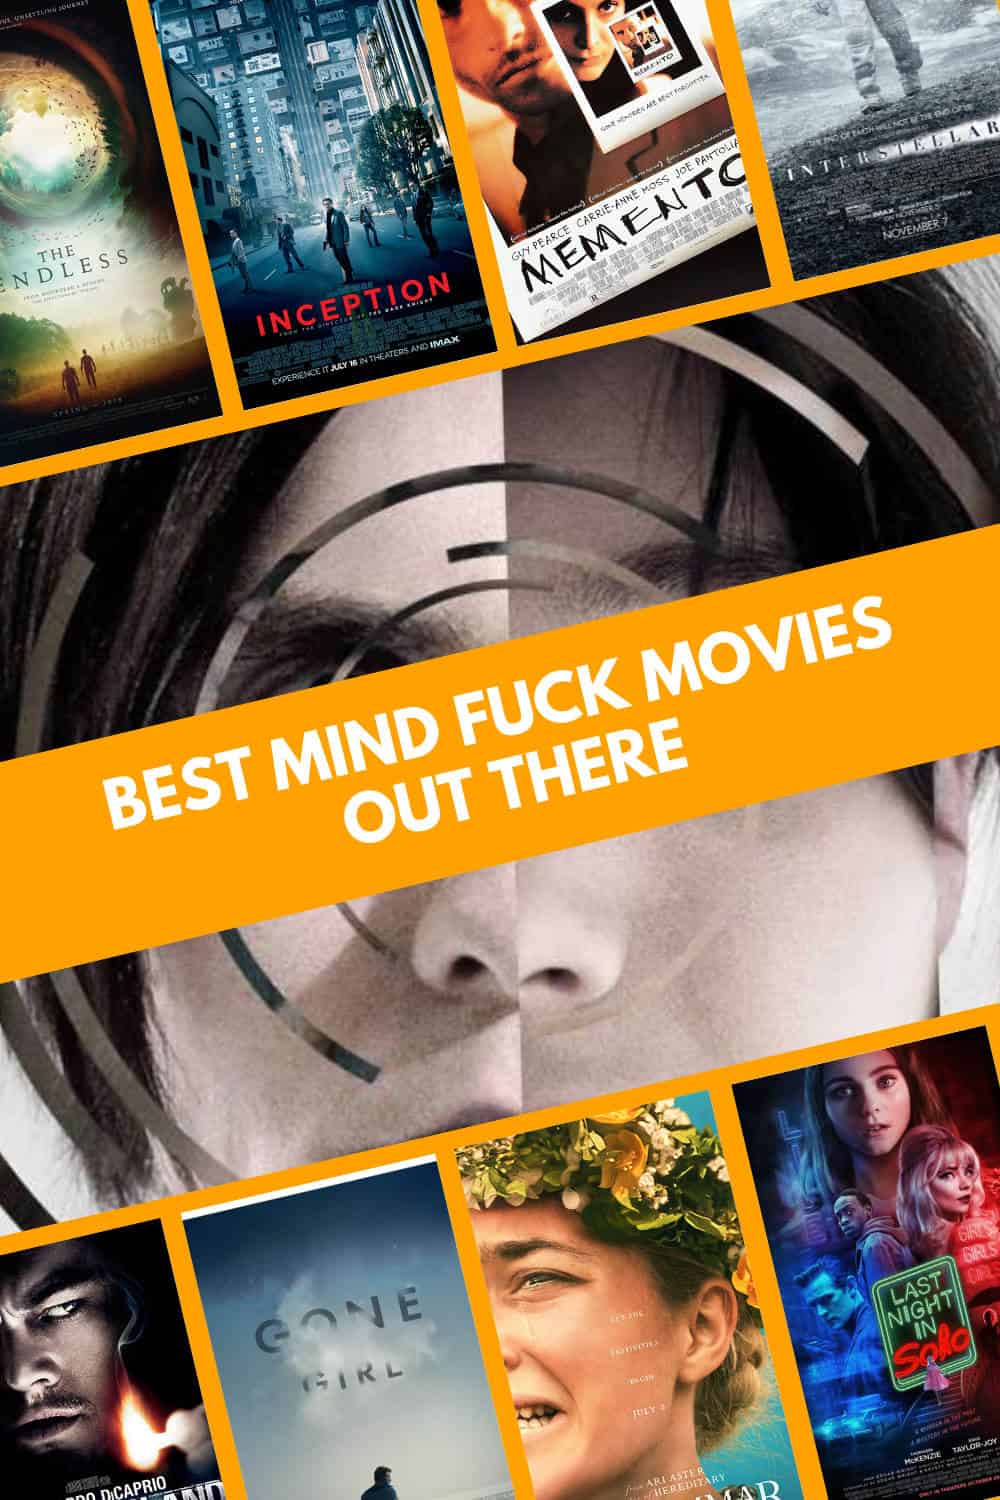 Mind Fuck Movies Out There